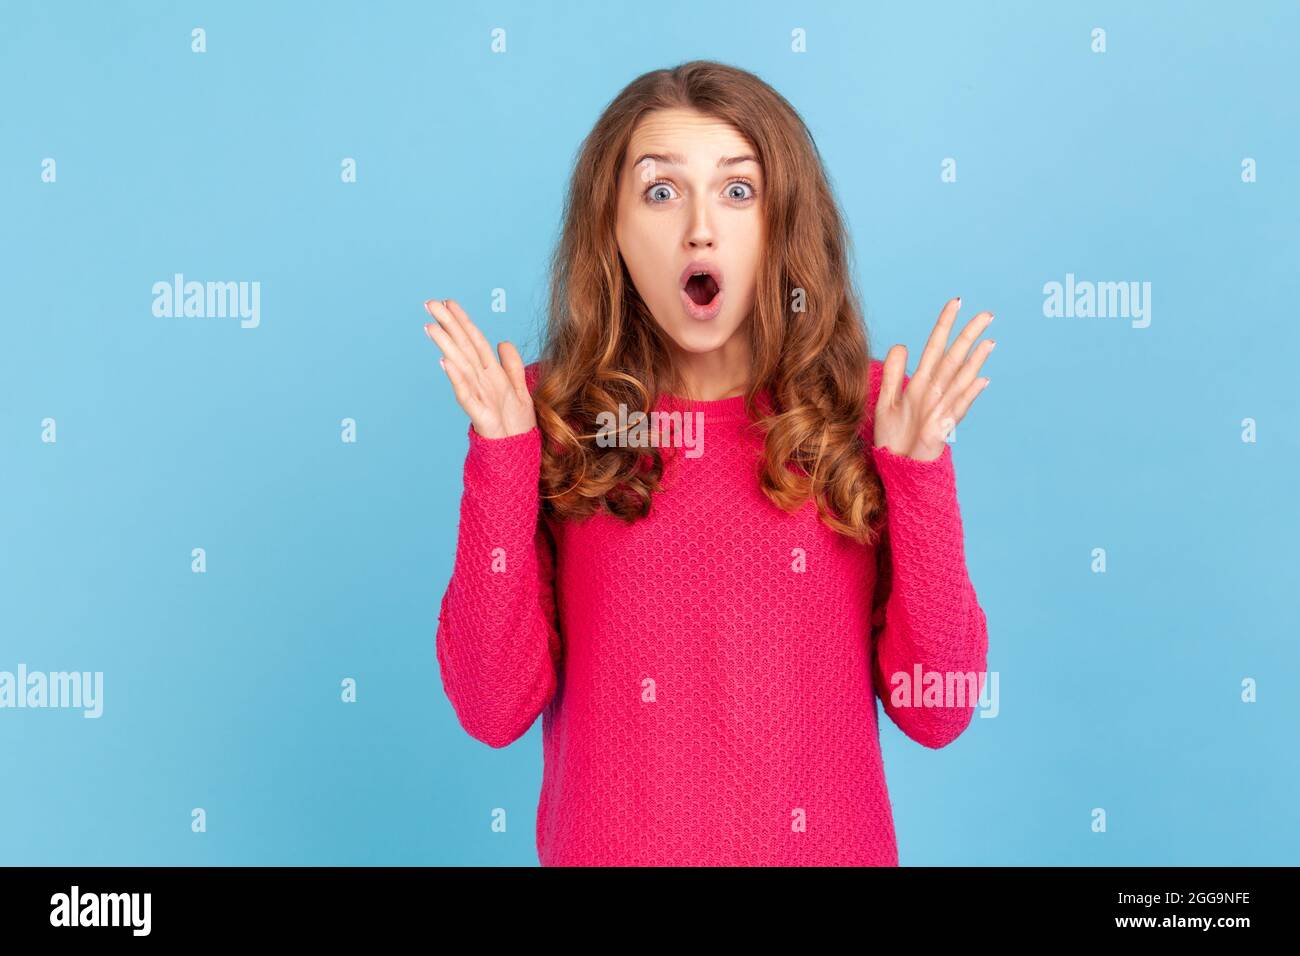 Portrait of shocked woman with wavy hair wearing pink pullover standing with raised arms and open mouth, hearing astonishing news, saying wow. Indoor Stock Photo